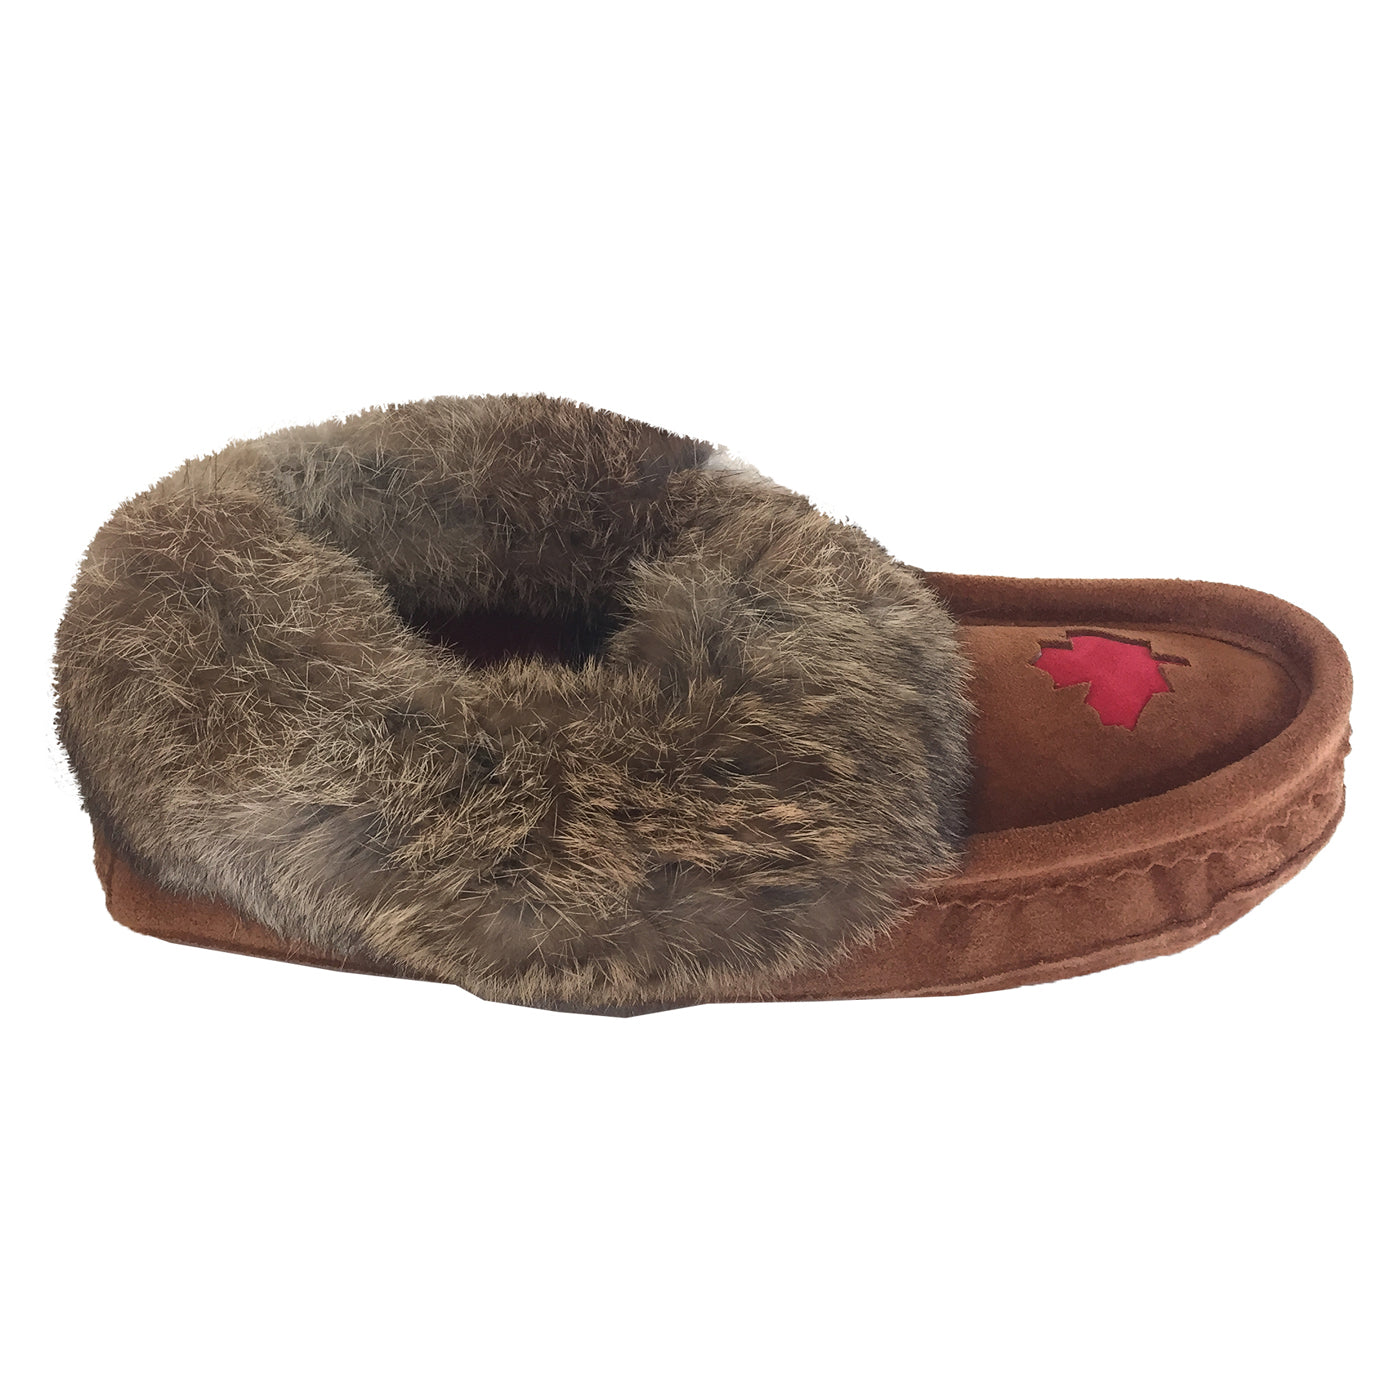 Women's Canadian Maple Leather Moccasin Slippers with Rabbit Fur Trim ...